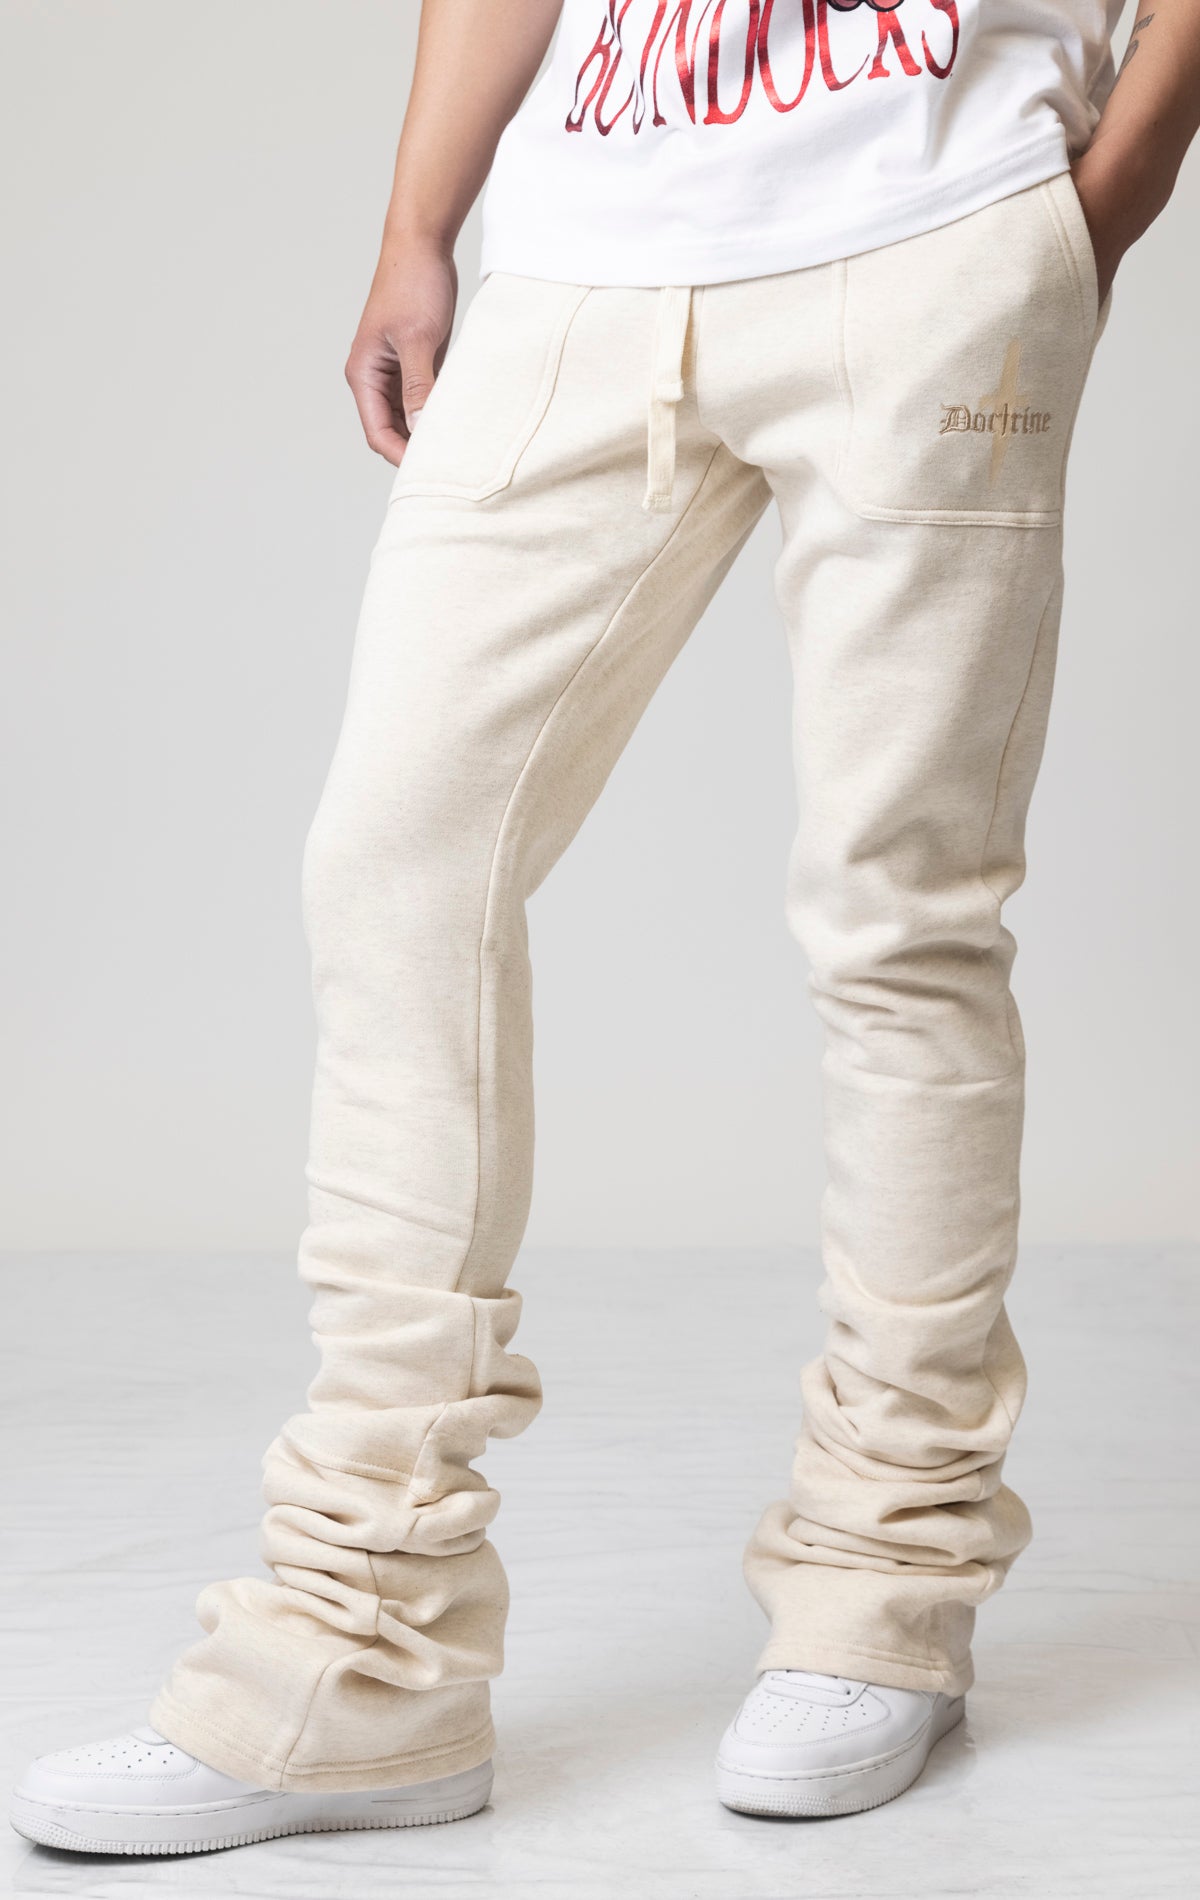 Oatmeal Core Dagger Super Stacked Joggers feature a unique, stacked leg design for a stylish look. Subtle embroidered branding adds a touch of detail. The joggers are made from a comfortable blend of 80% cotton and 20% polyester for all-day wear. An elastic waistband and pockets offer both convenience and functionality.